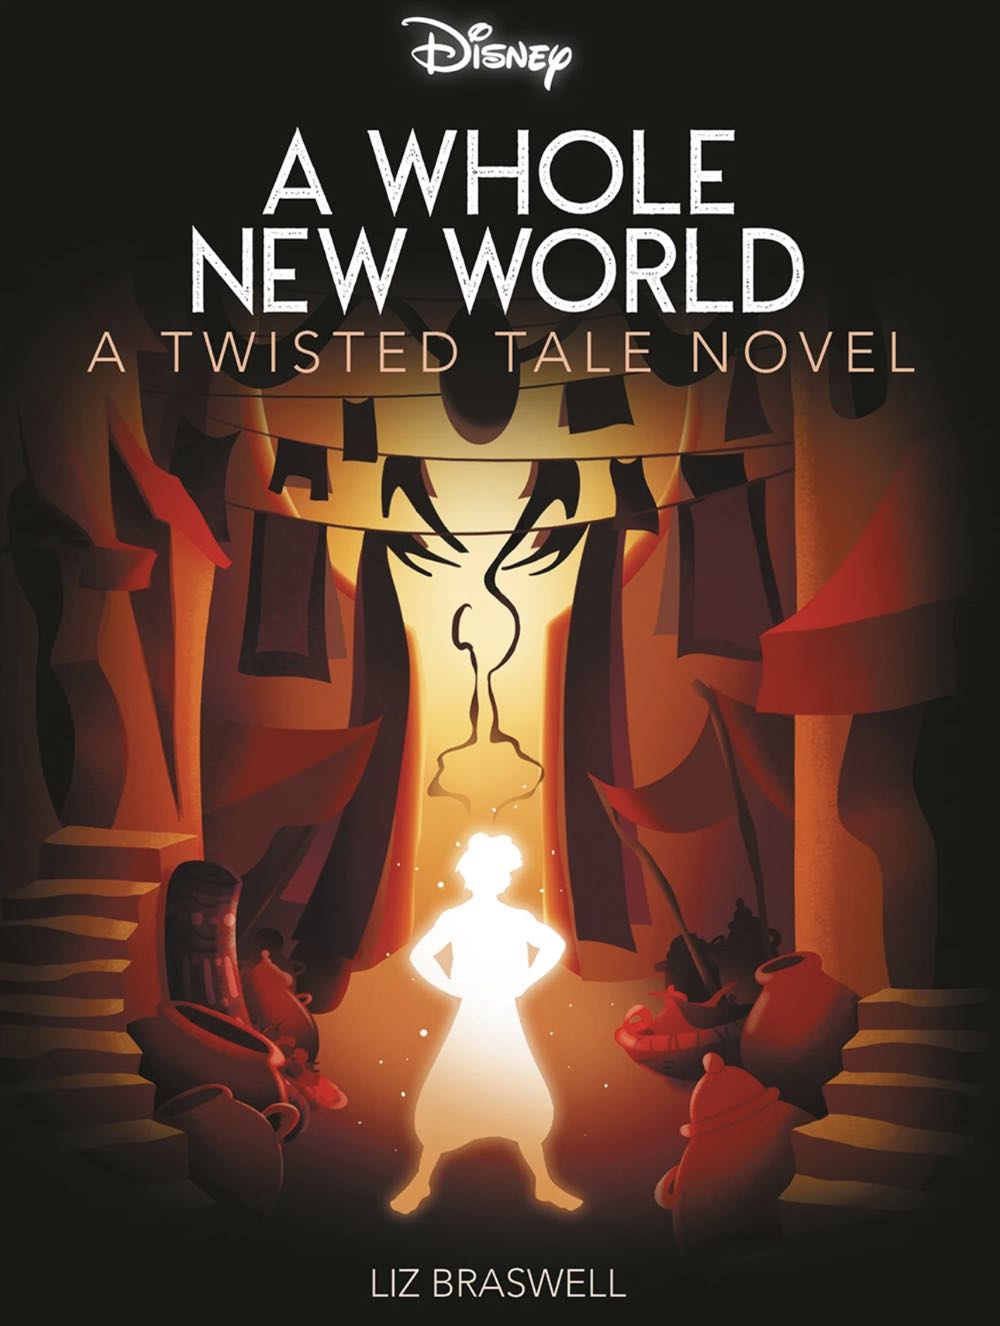 Disney Twisted Tales #1: A Whole New World - Braswell, Liz (Disney Hyperion - Paperback) book collectible [Barcode 9781484707326] - Main Image 3